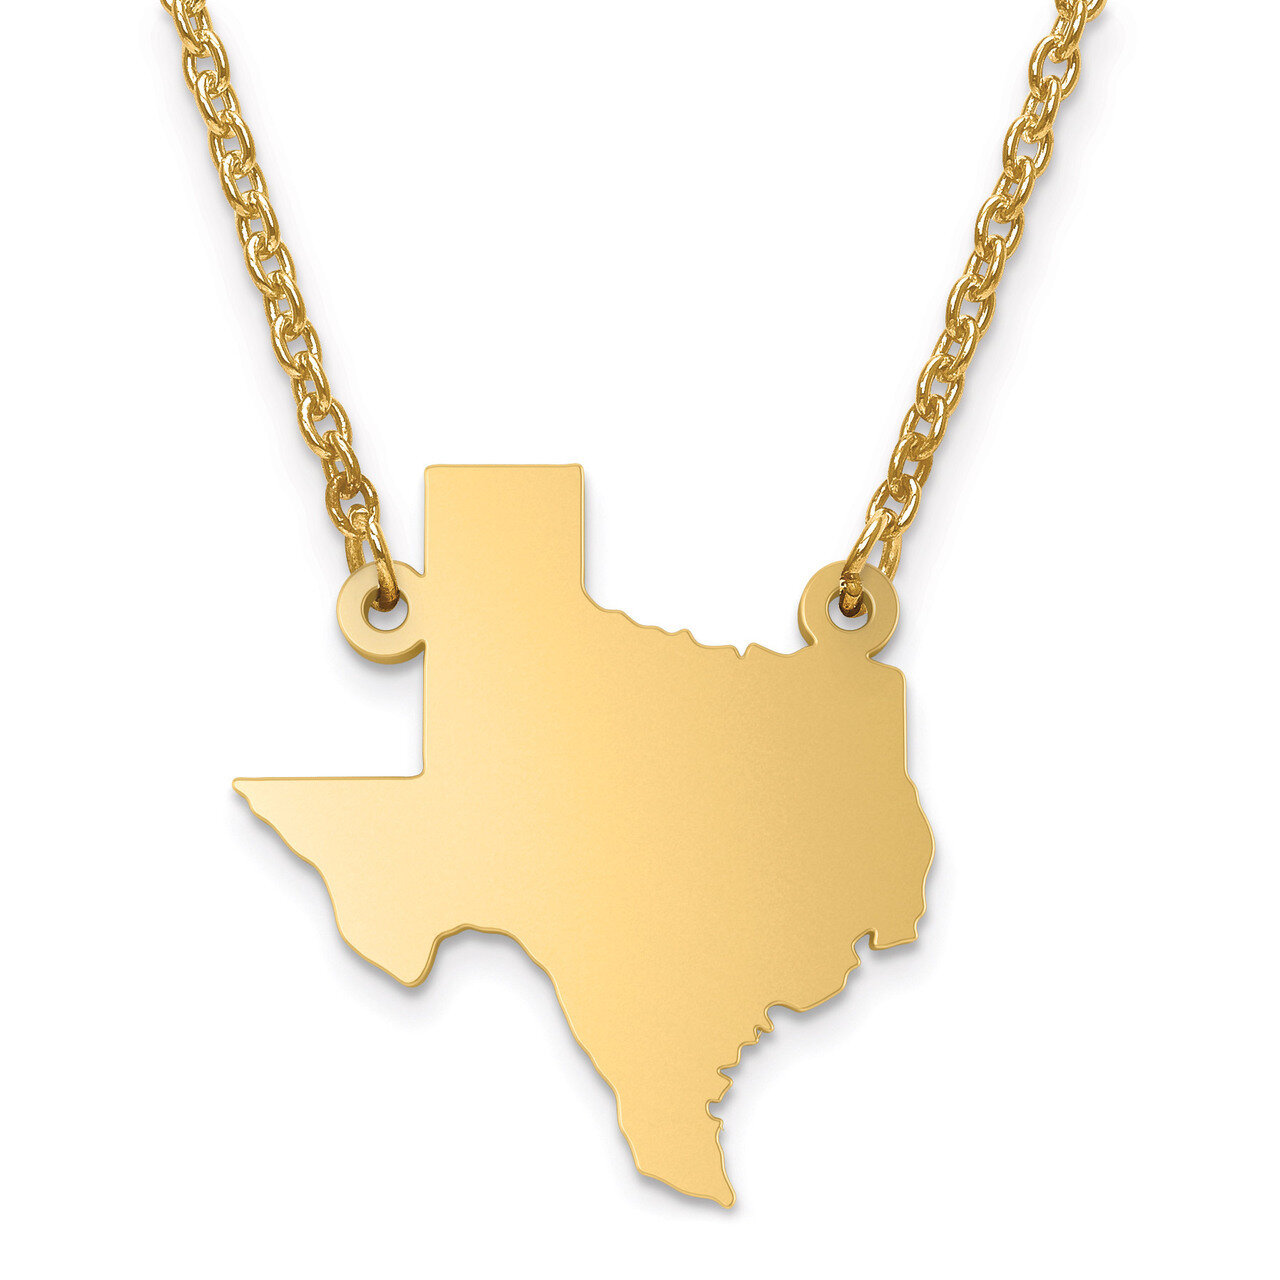 Texas State Pendant with Chain Engravable Gold-plated on Sterling Silver